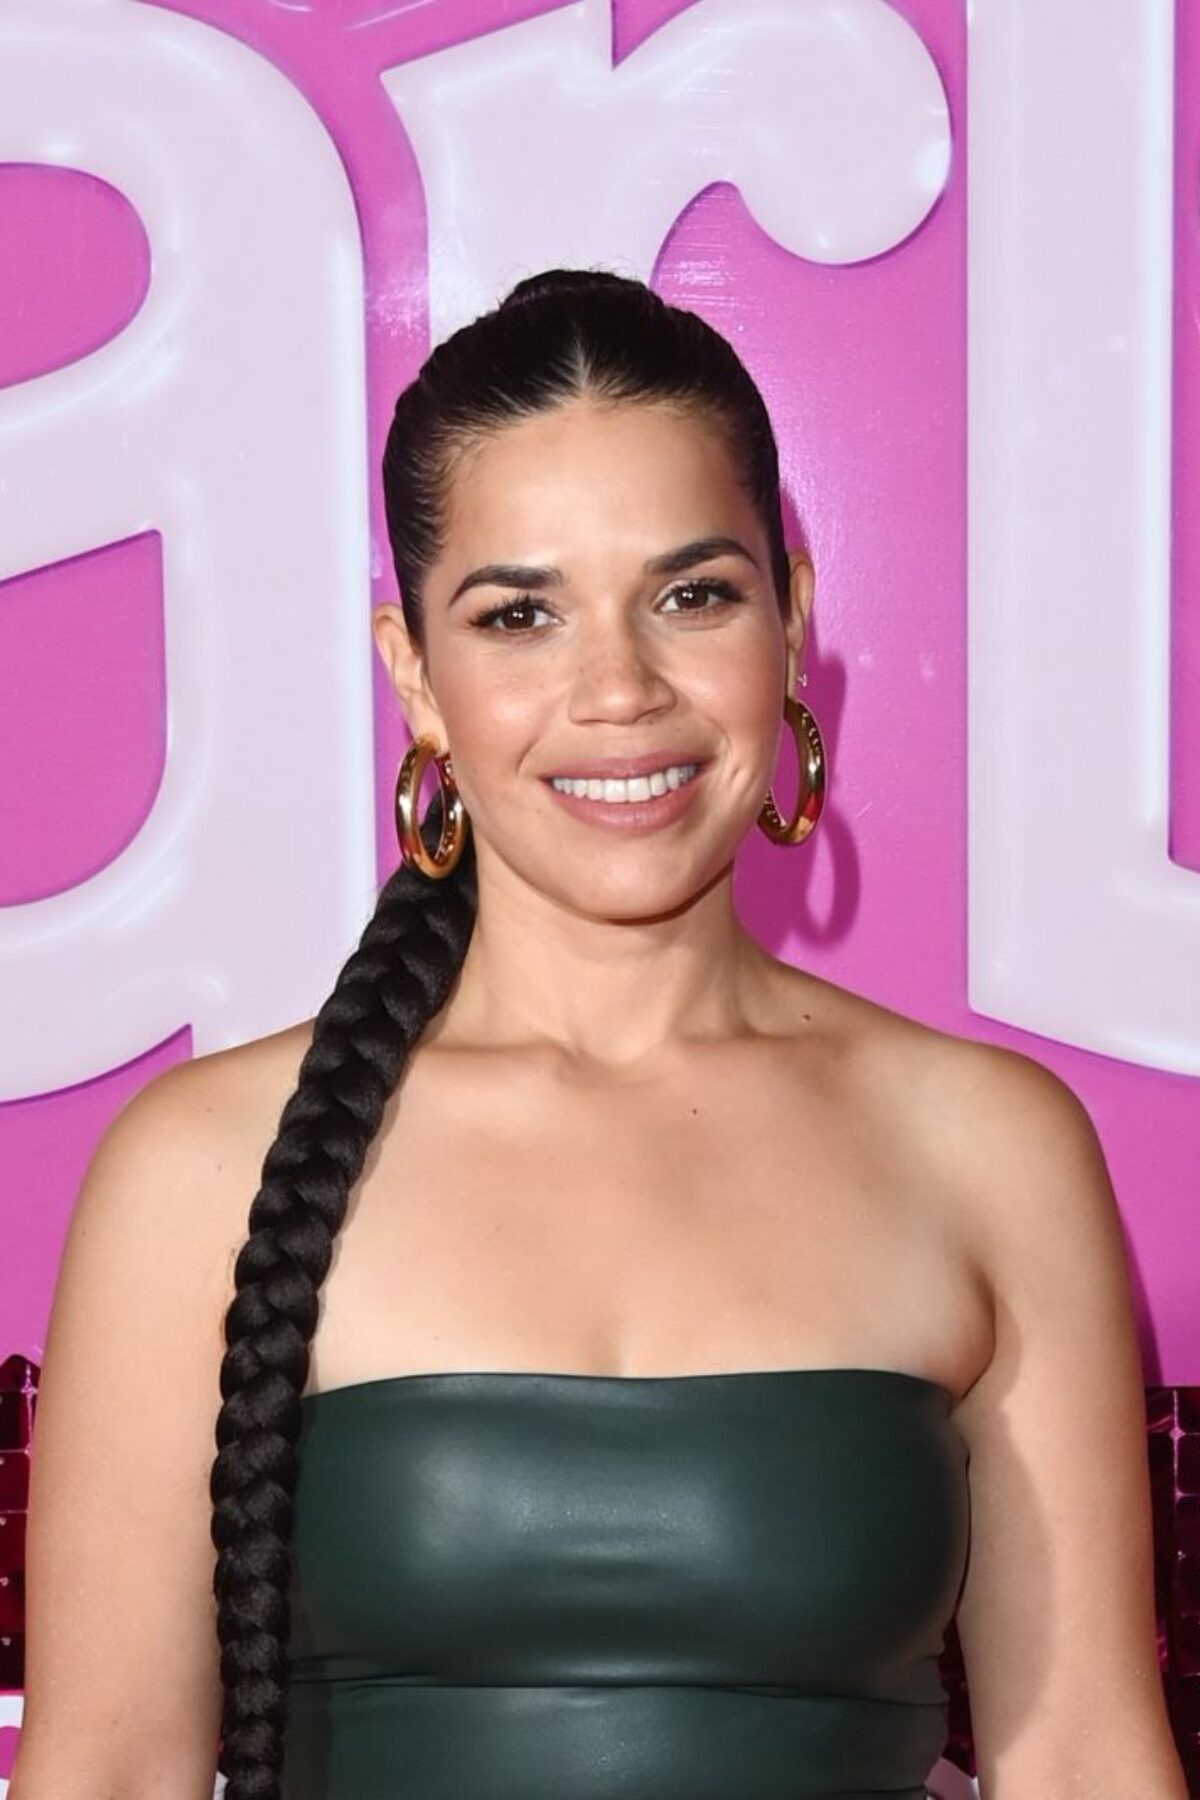 LONDON, ENGLAND - JULY 13: America Ferrera attends a photocall on July 13, 2023 in London, England. (Photo by Stuart C. Wilson/Getty Images for Warner Bros.)